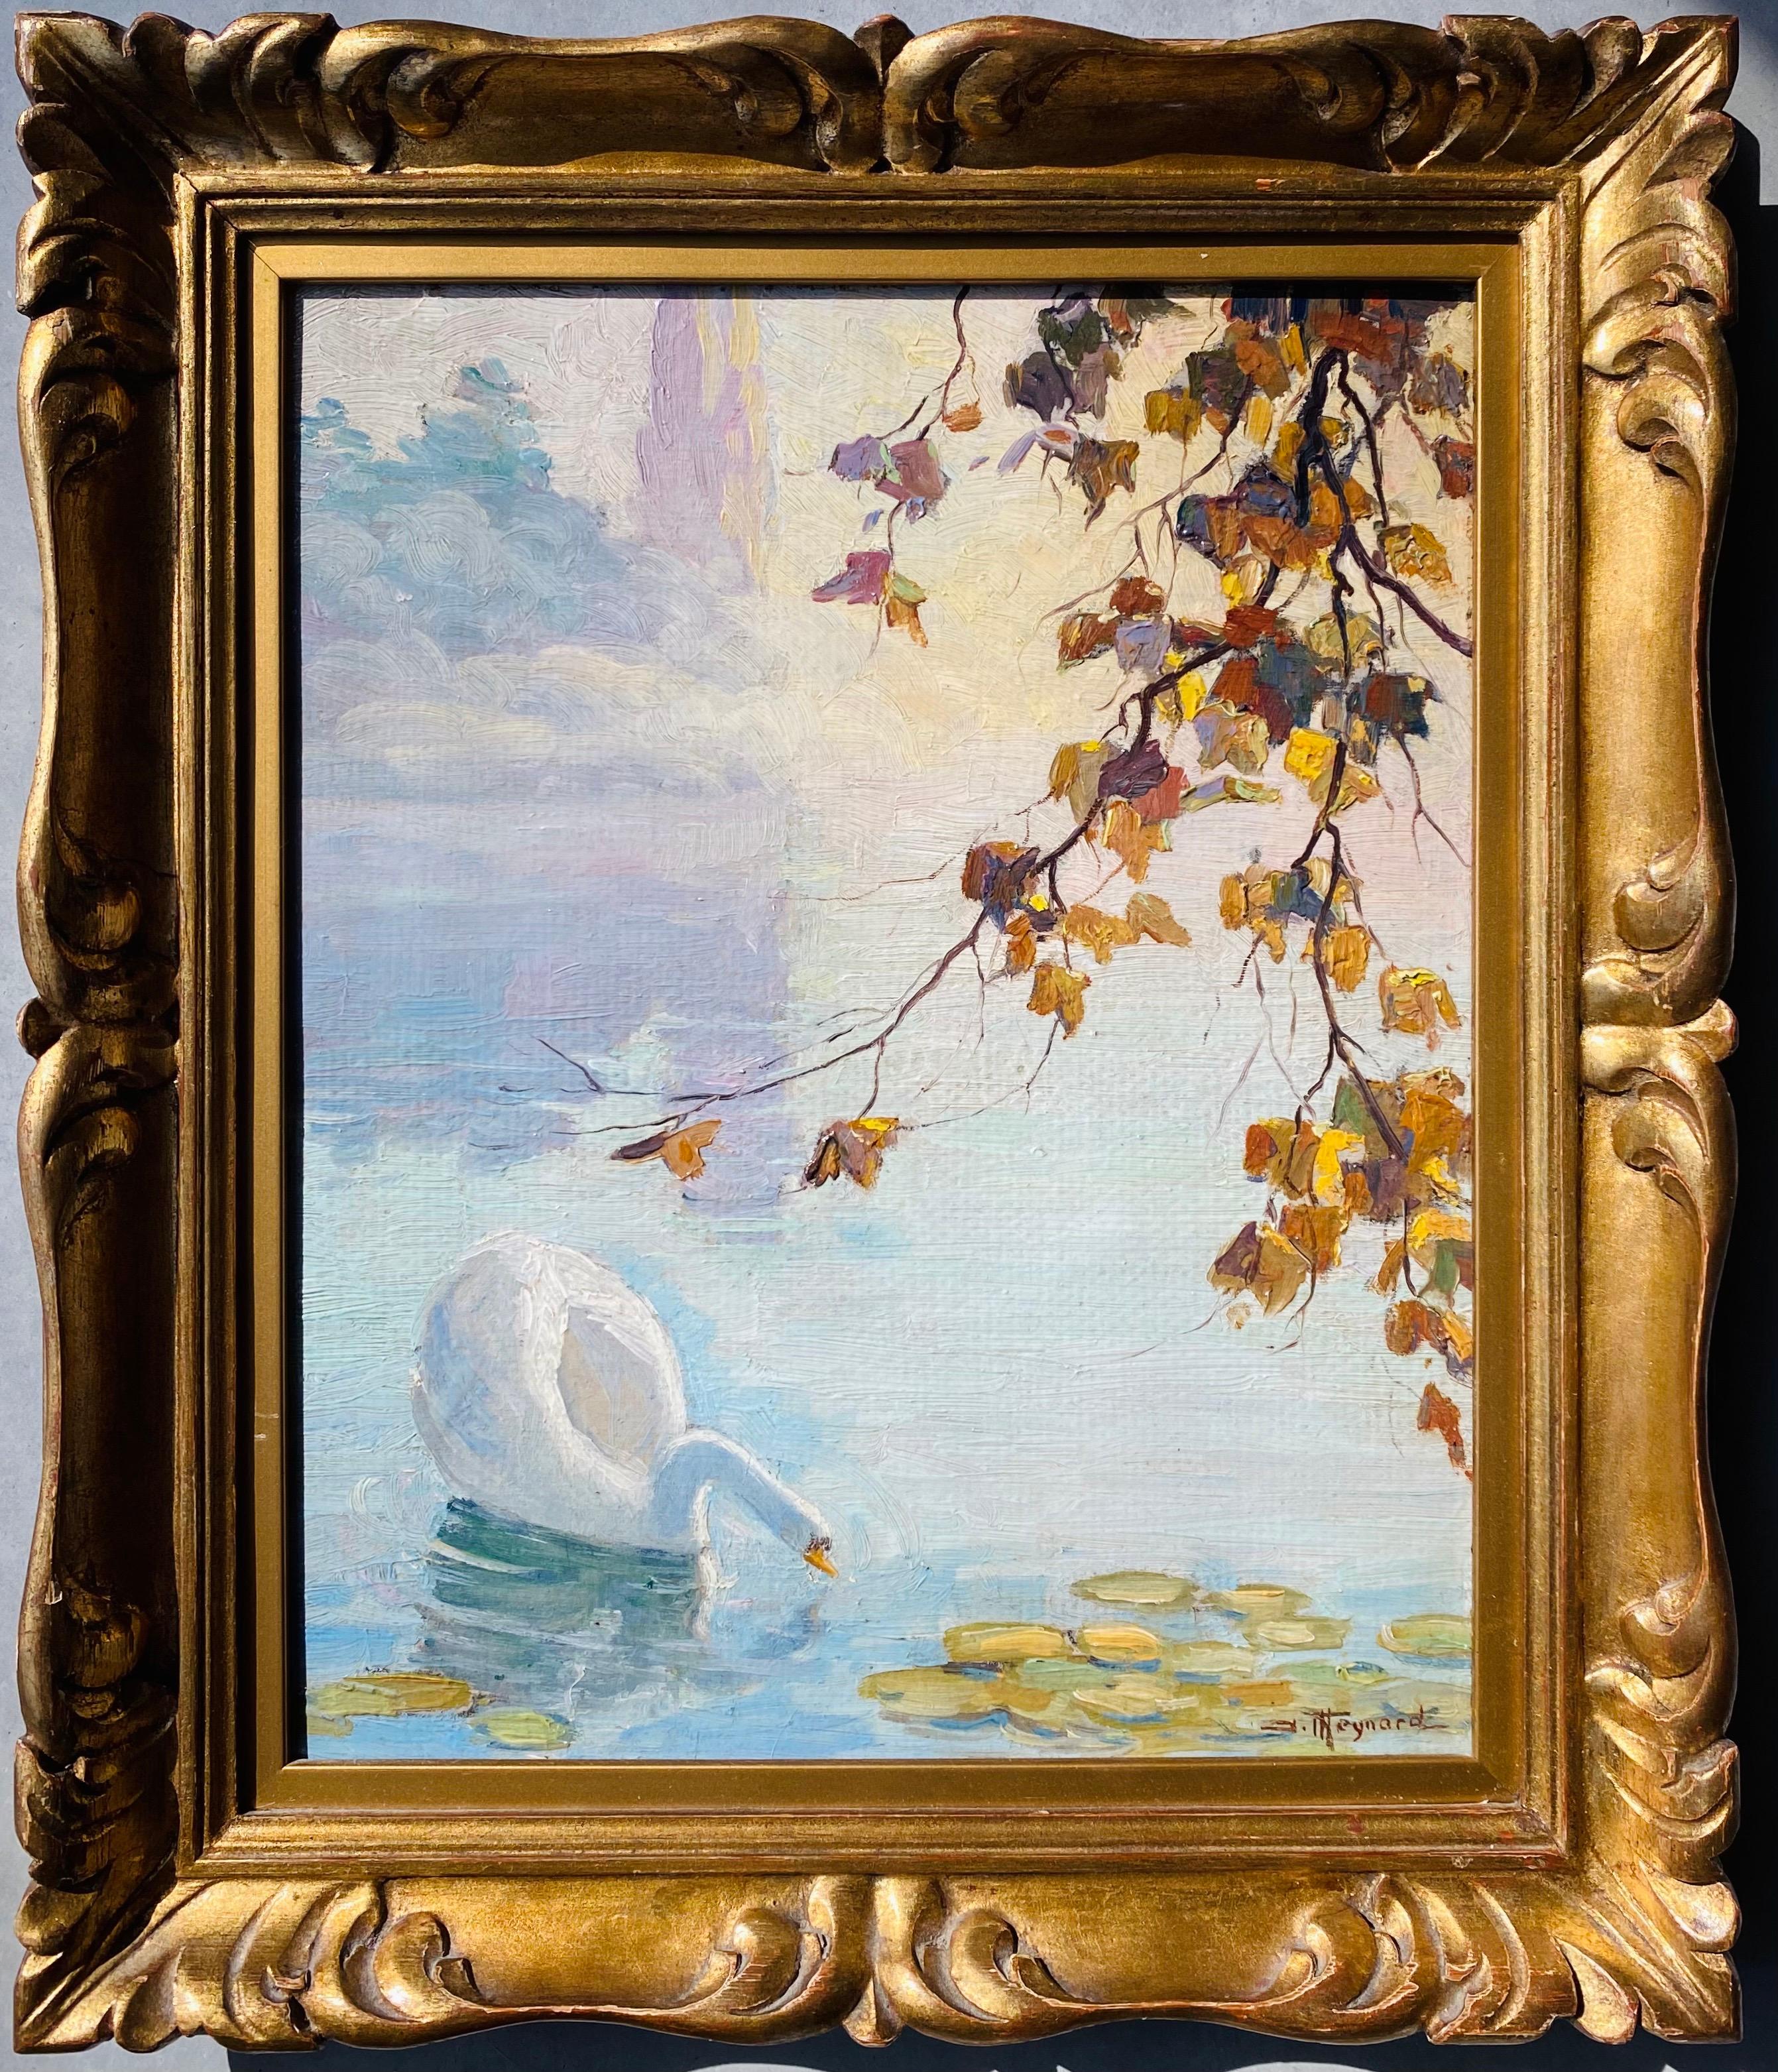 Unknown Figurative Painting - Romantic French Ecole de Paris Painting - Swan in a lake 